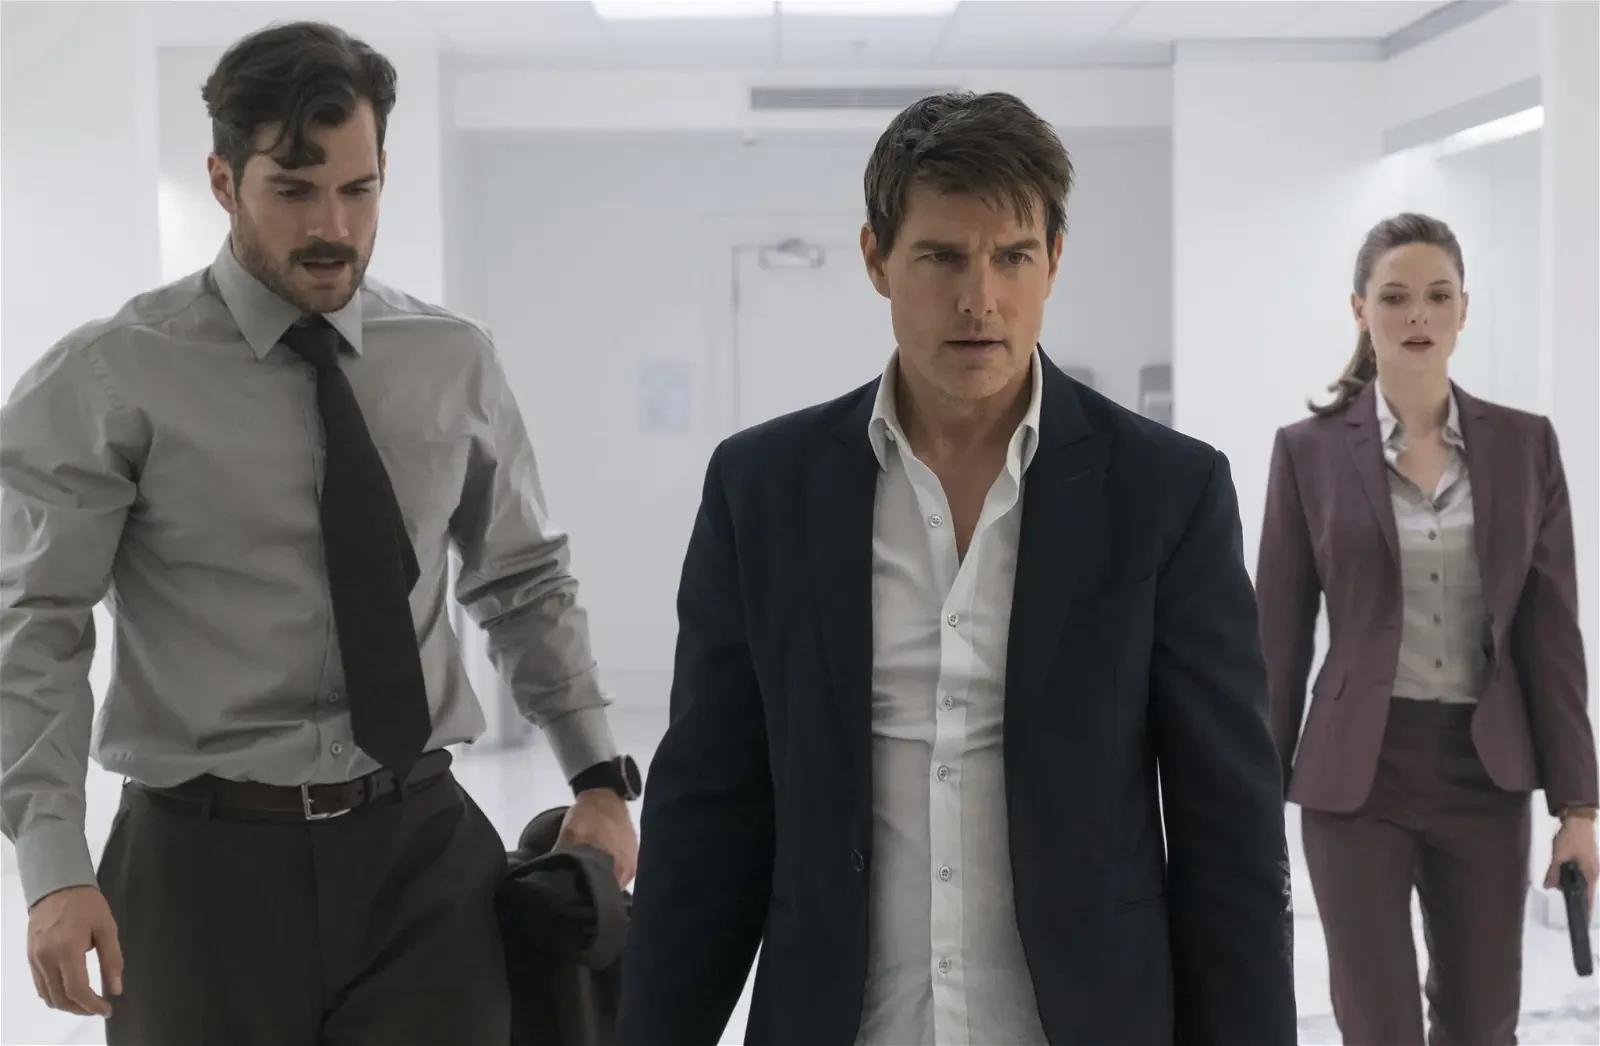 Tom Cruise and Henry Cavill in the infamous “bathroom fight scene” from Mission: Impossible- Fallout